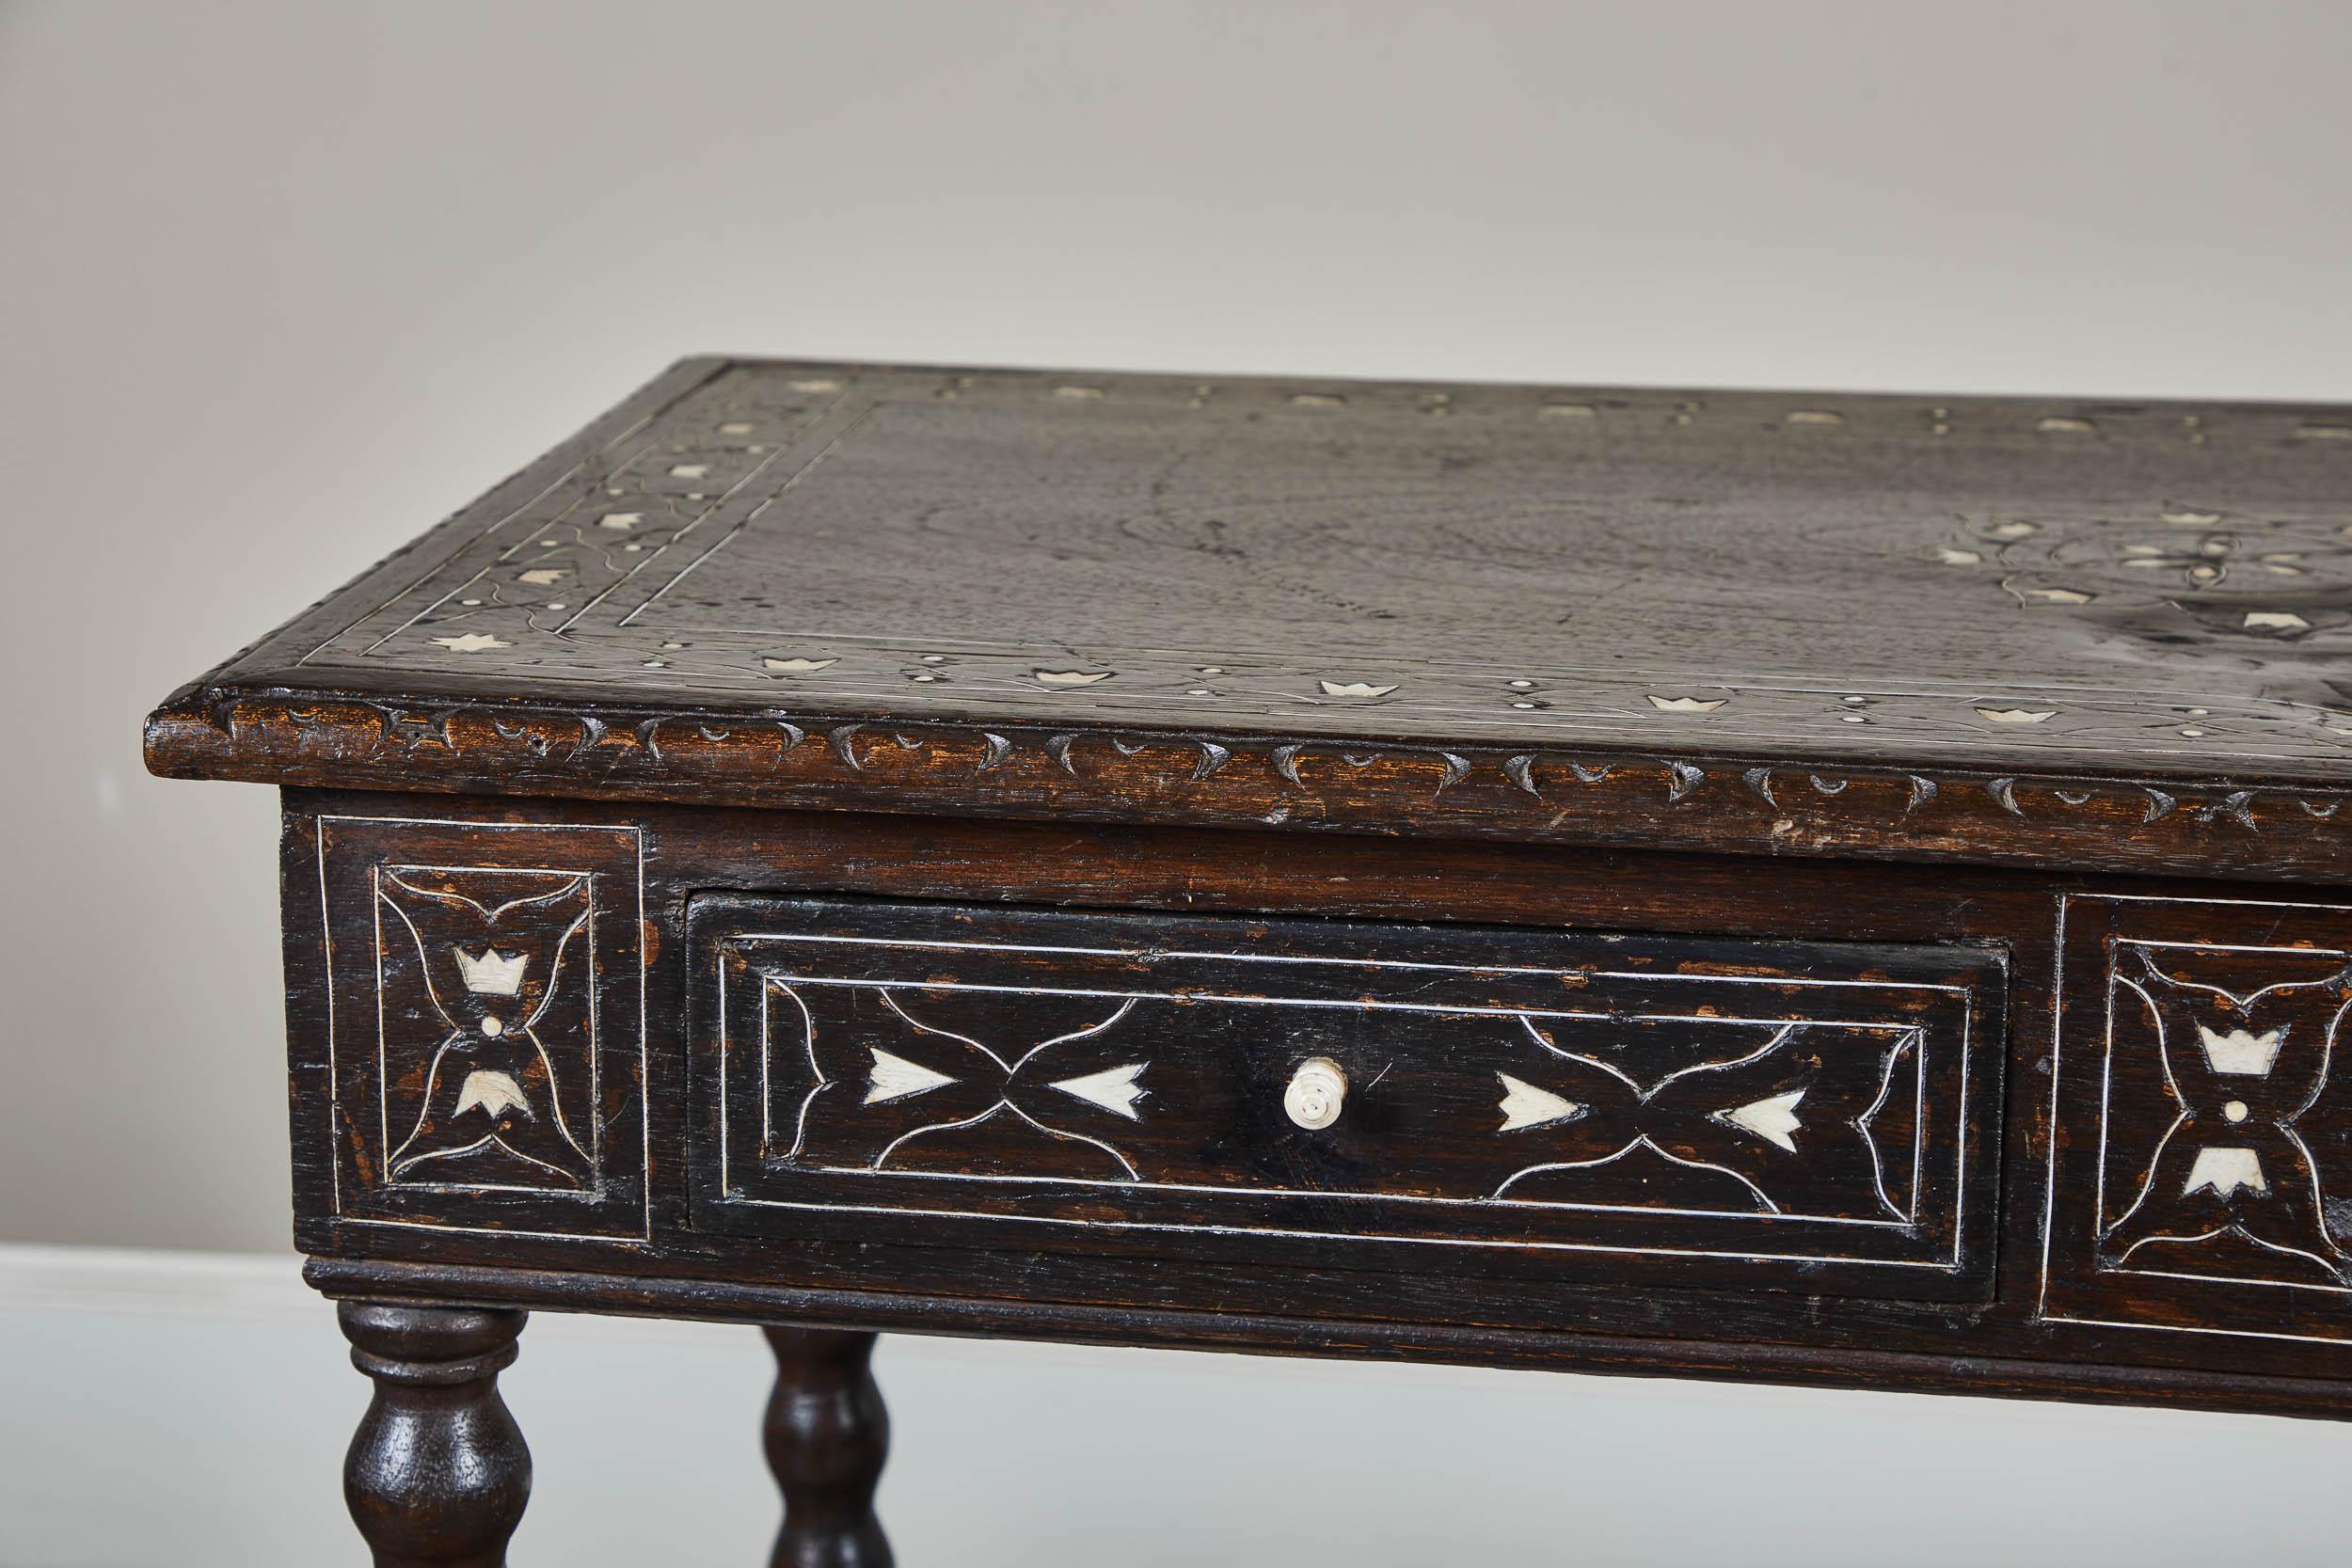 A late 19th century Spanish Colonial style console table with two drawers. With later metal and bone inlay. Walnut construction, in good antique condition.